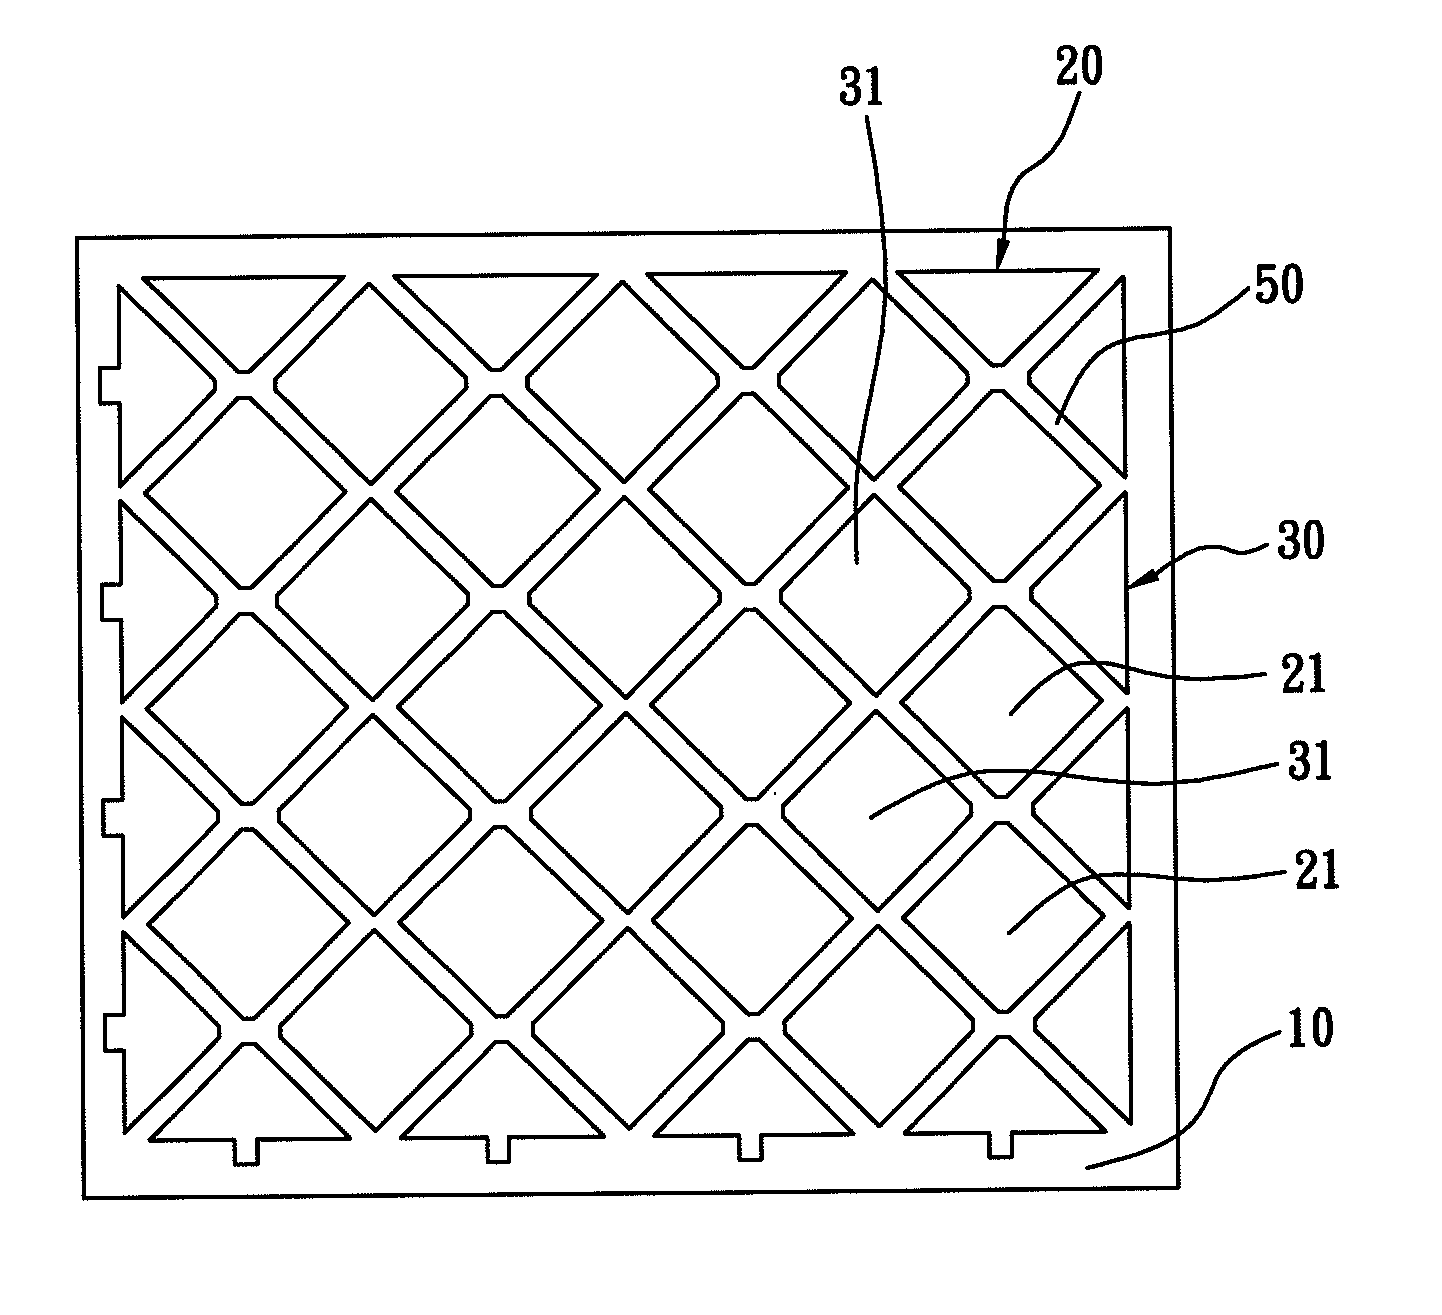 Capacitive touch panel having color compensation layer